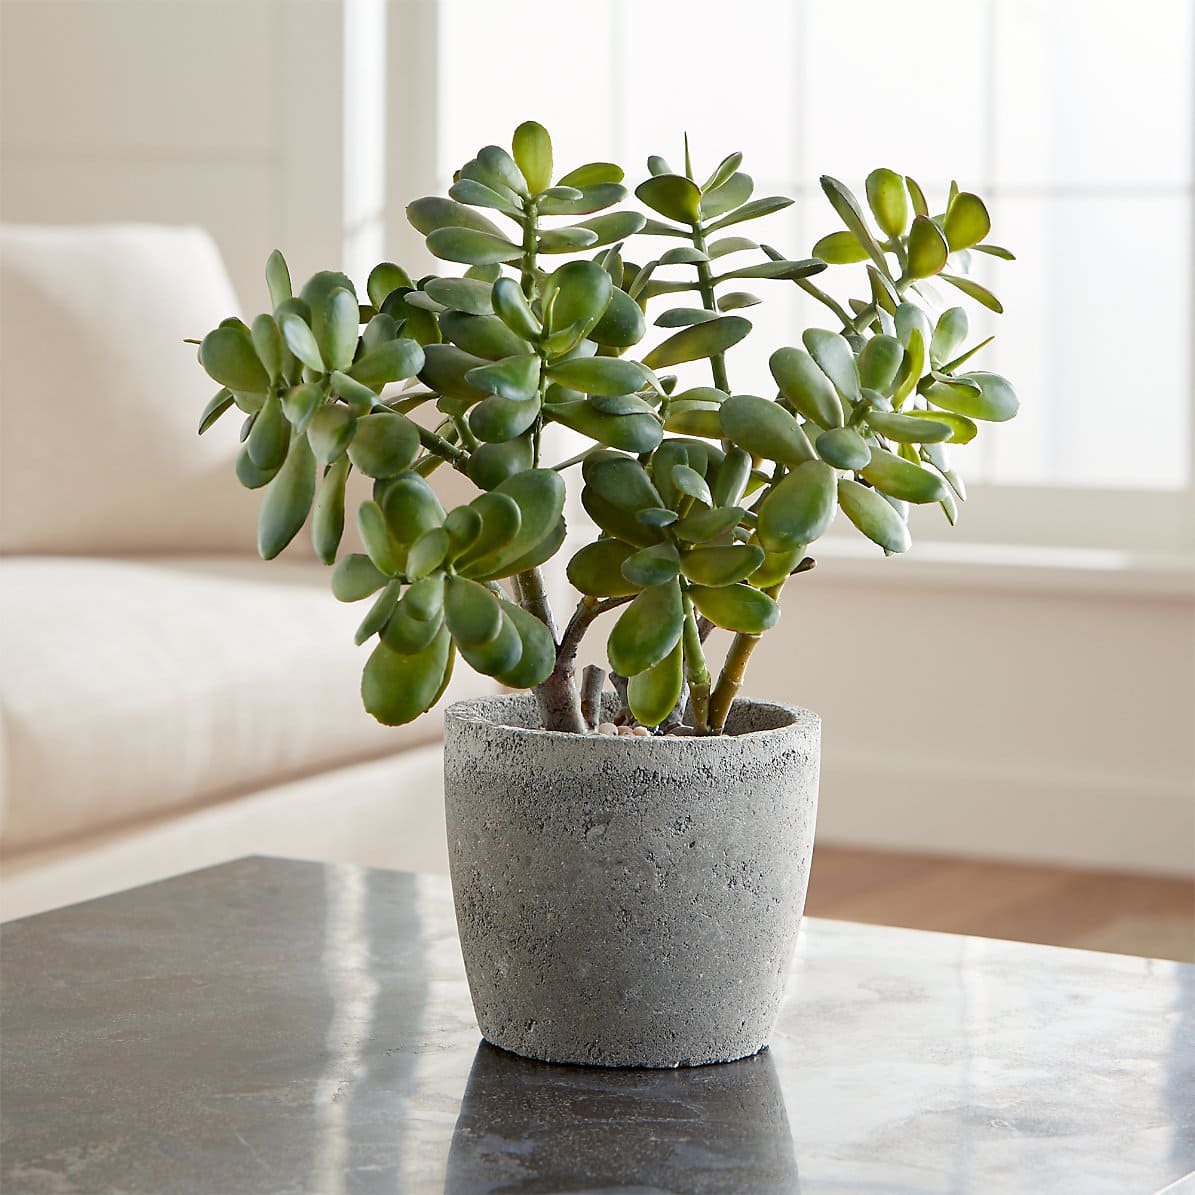 The 5 best houseplants for removing indoor air pollution - 37